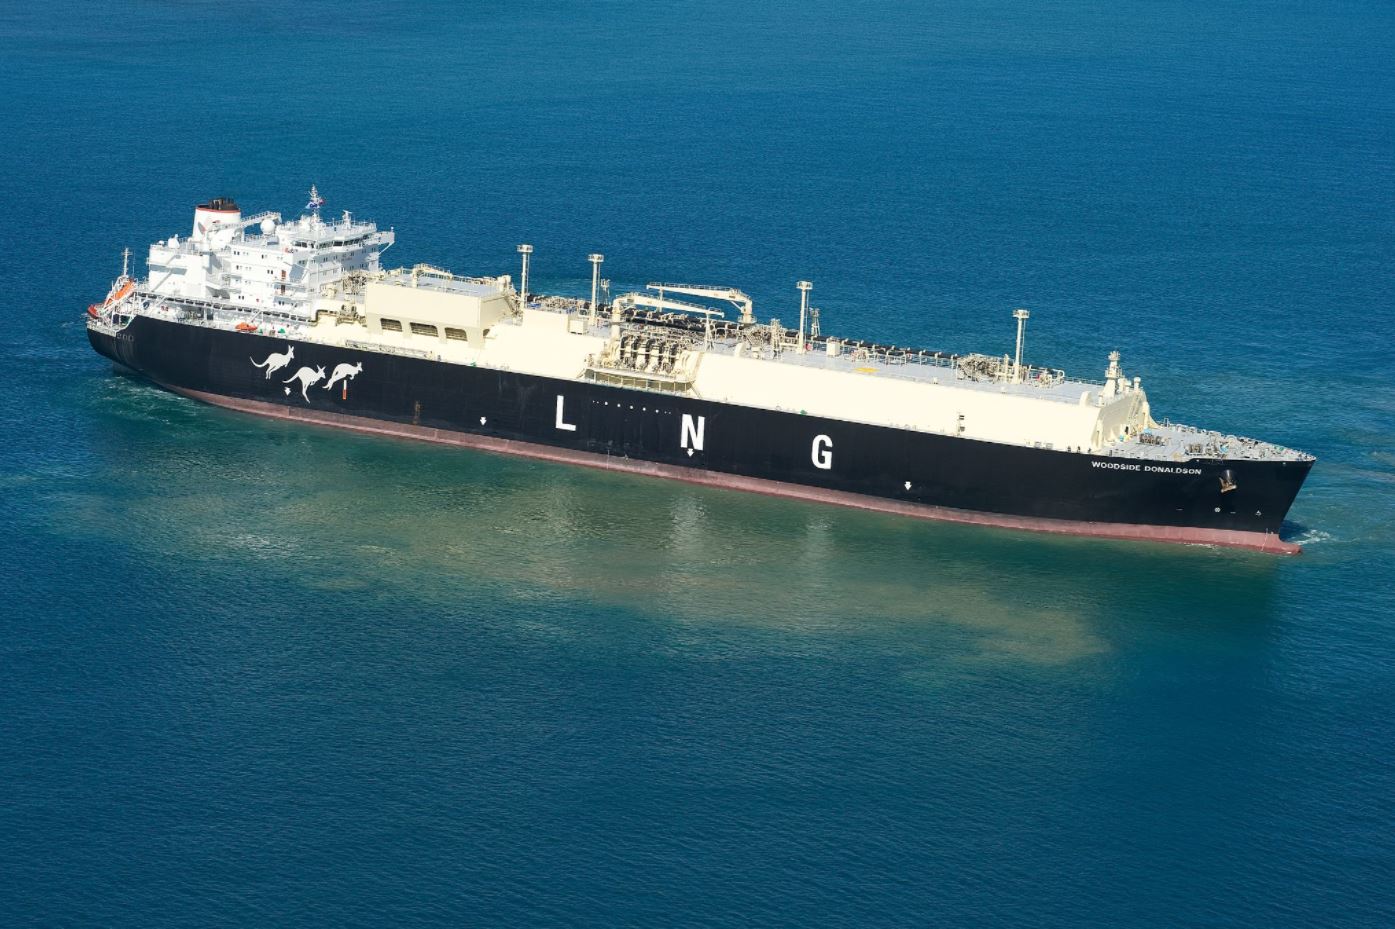 Australia’s Viva inks Geelong LNG deals with Woodside and Hoegh